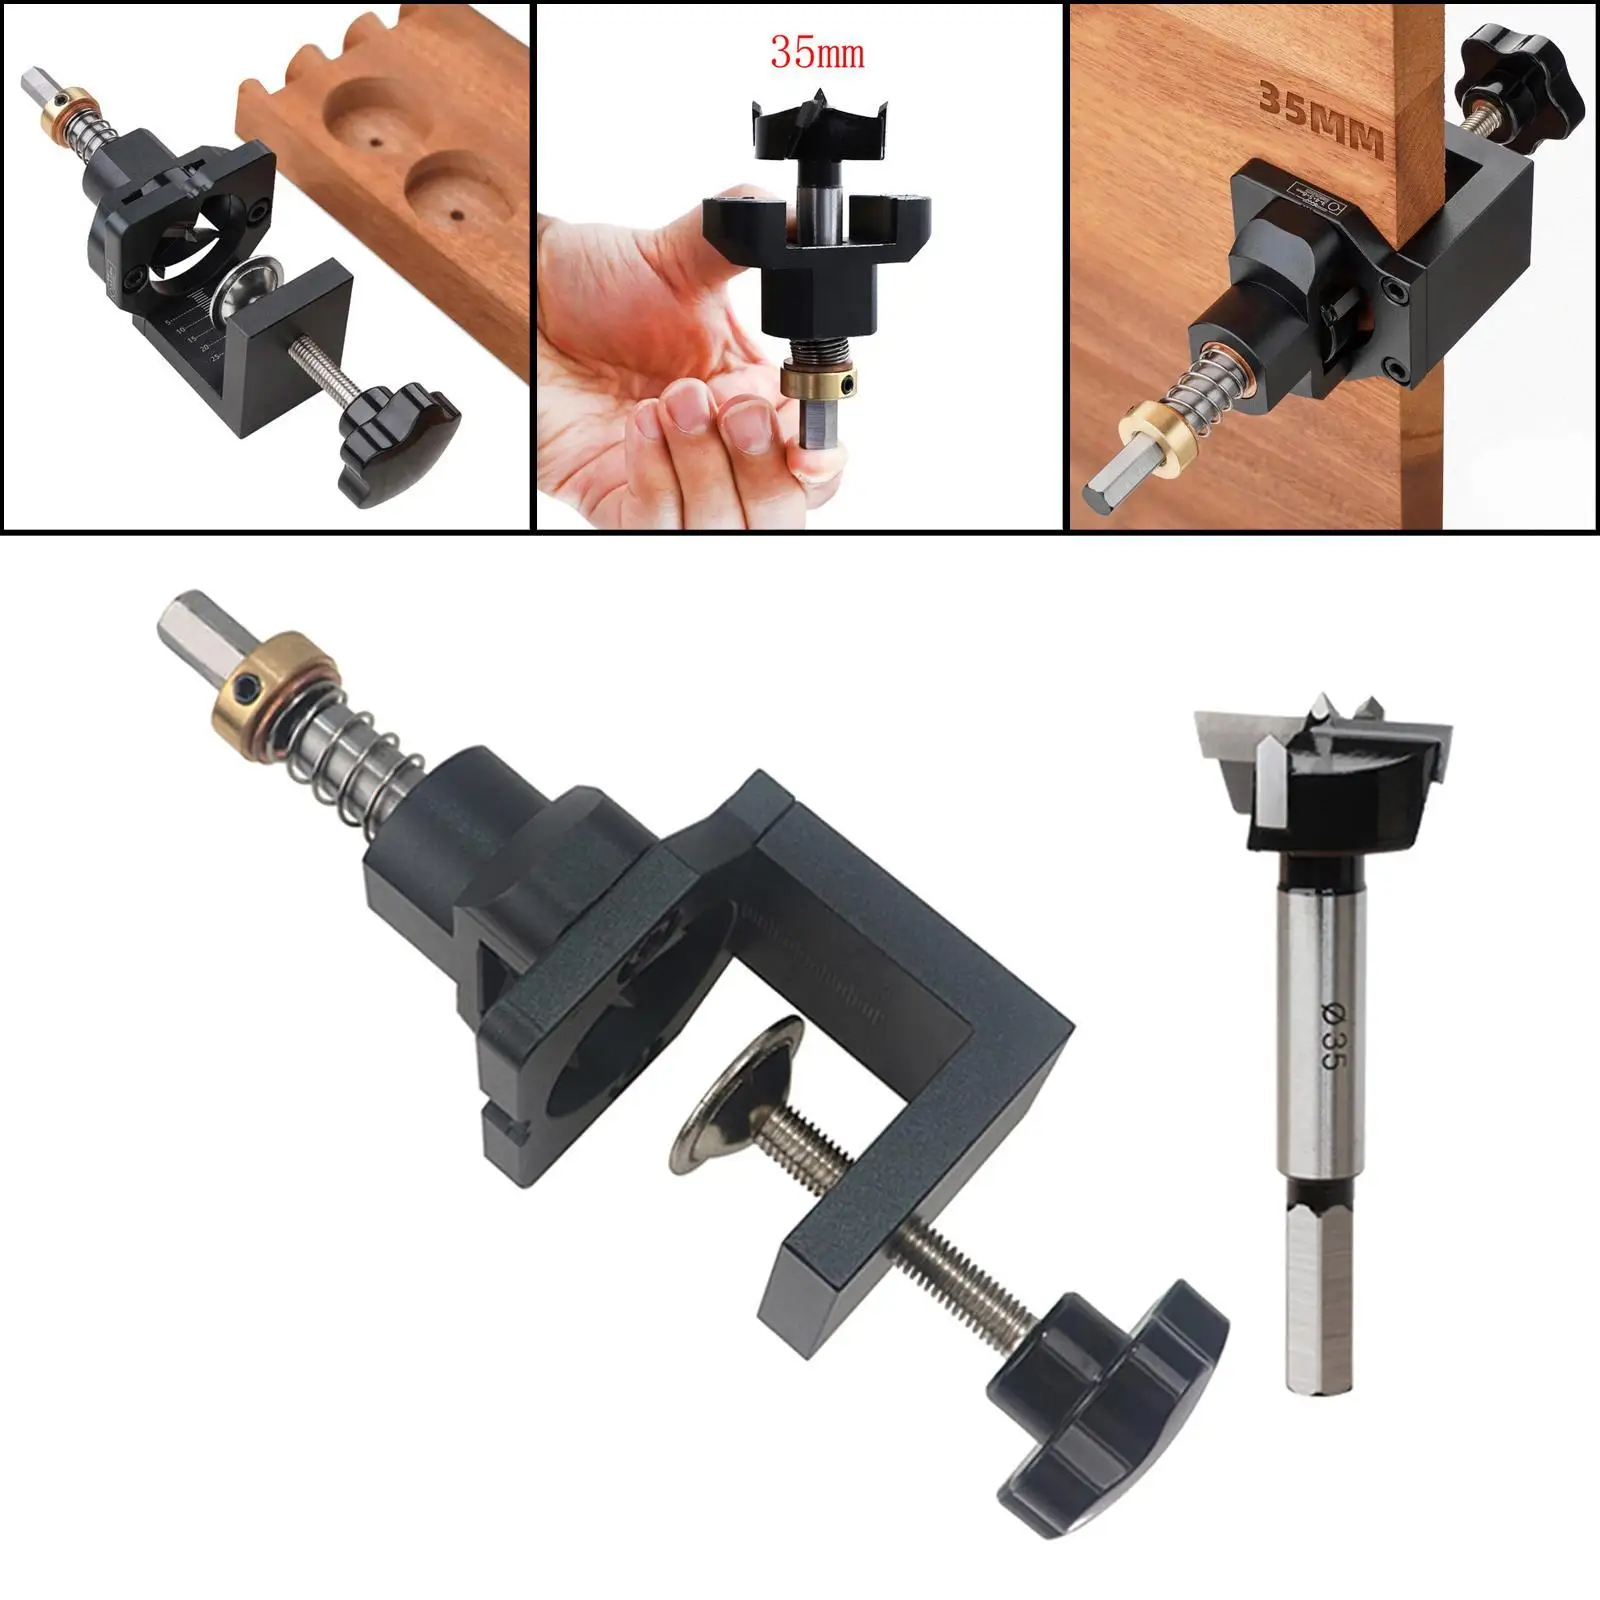 Hole Drill Jig Tools Kit Puncher Hinge Guide for Woodworking Cabinet